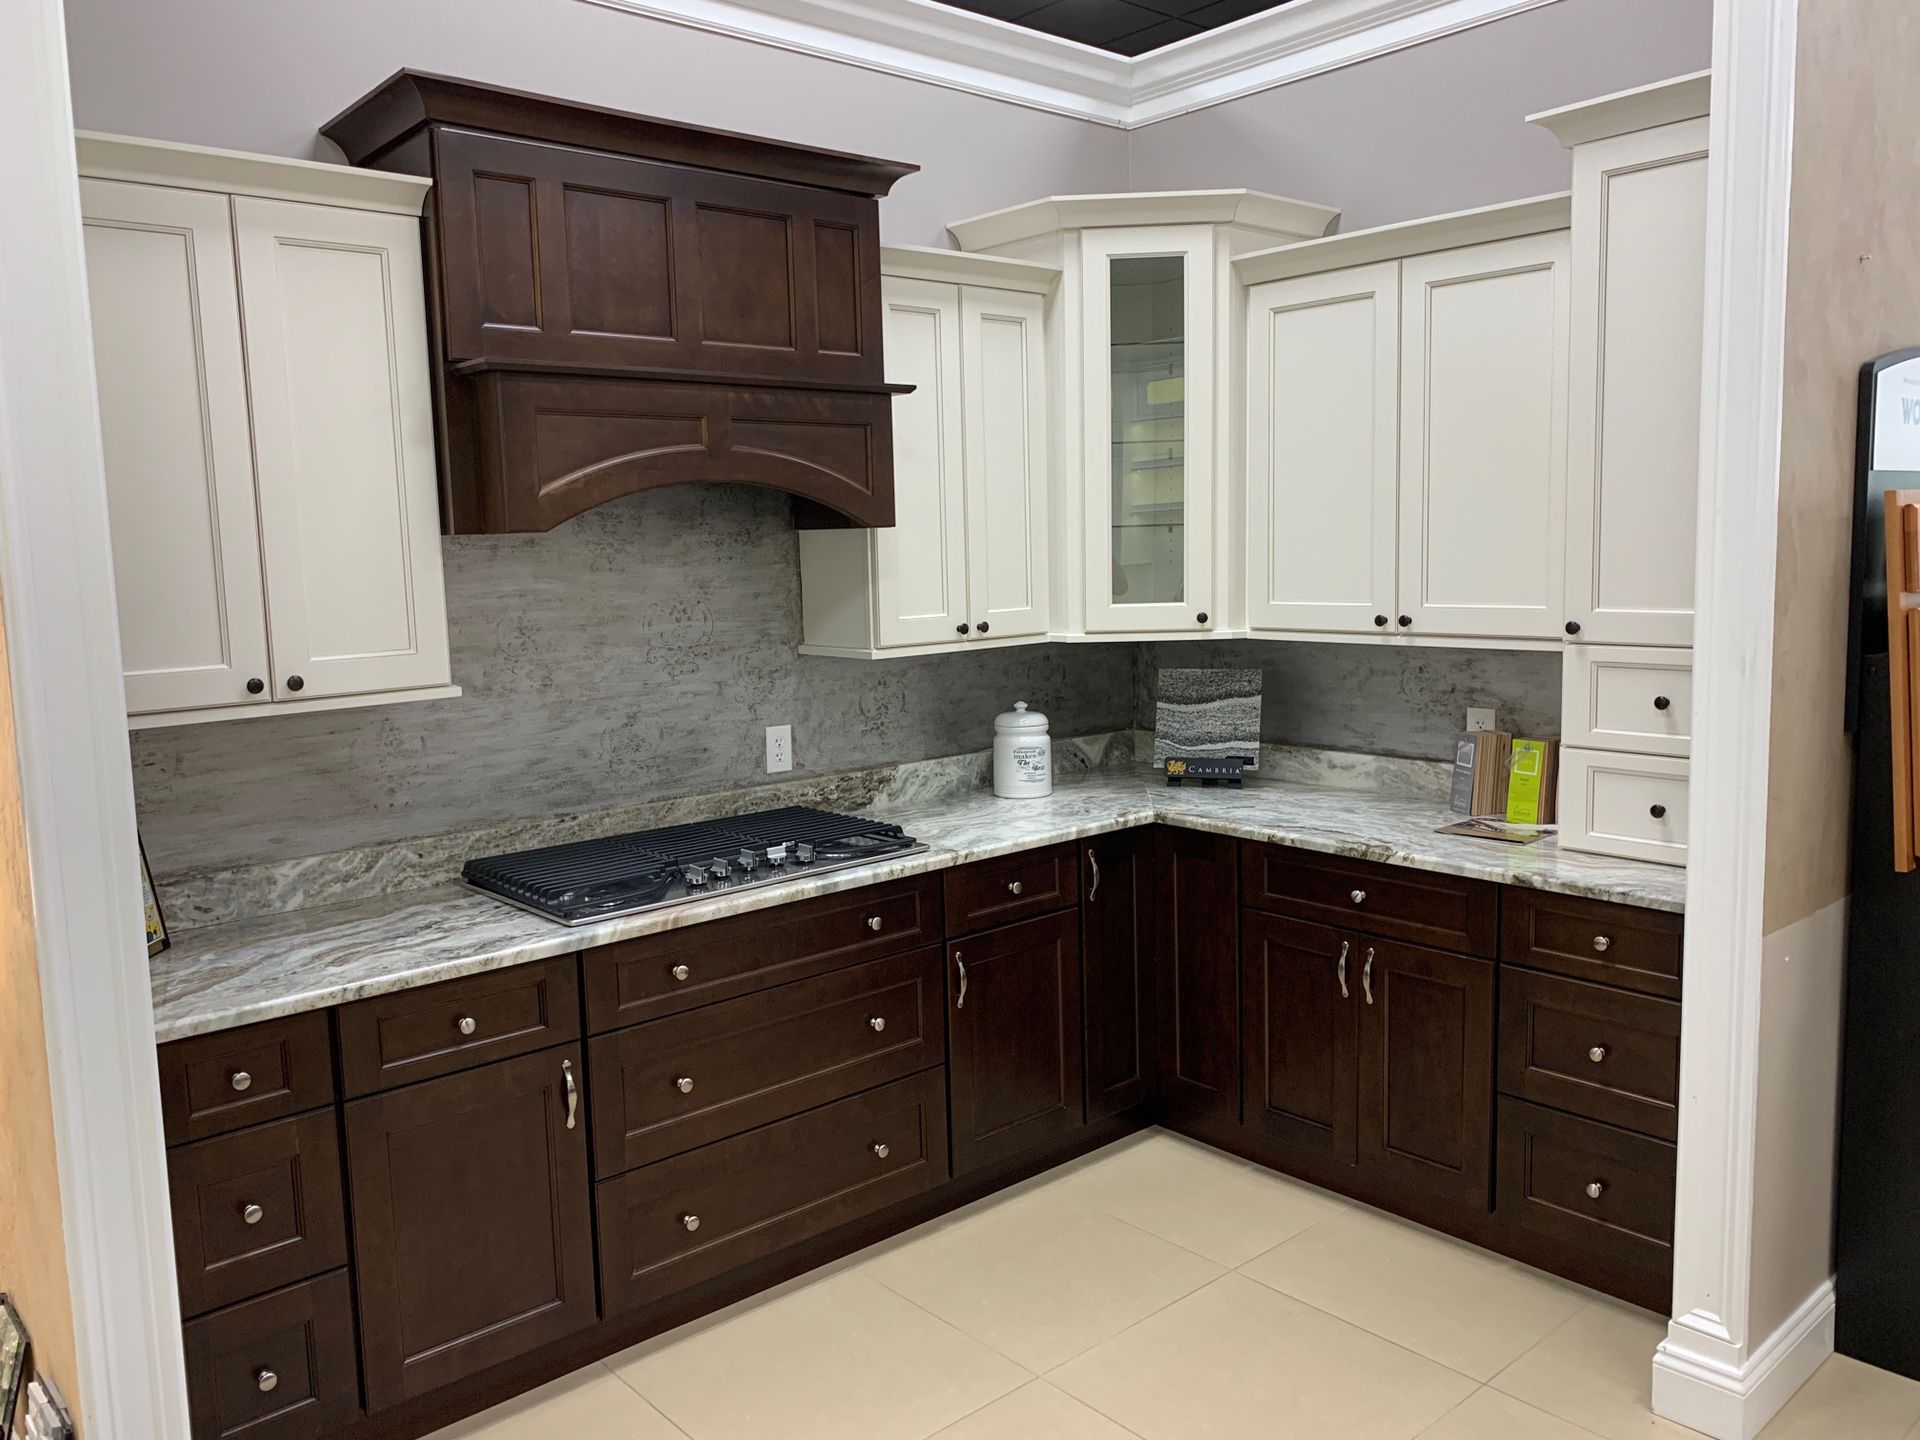 Kitchen cabinets with granite